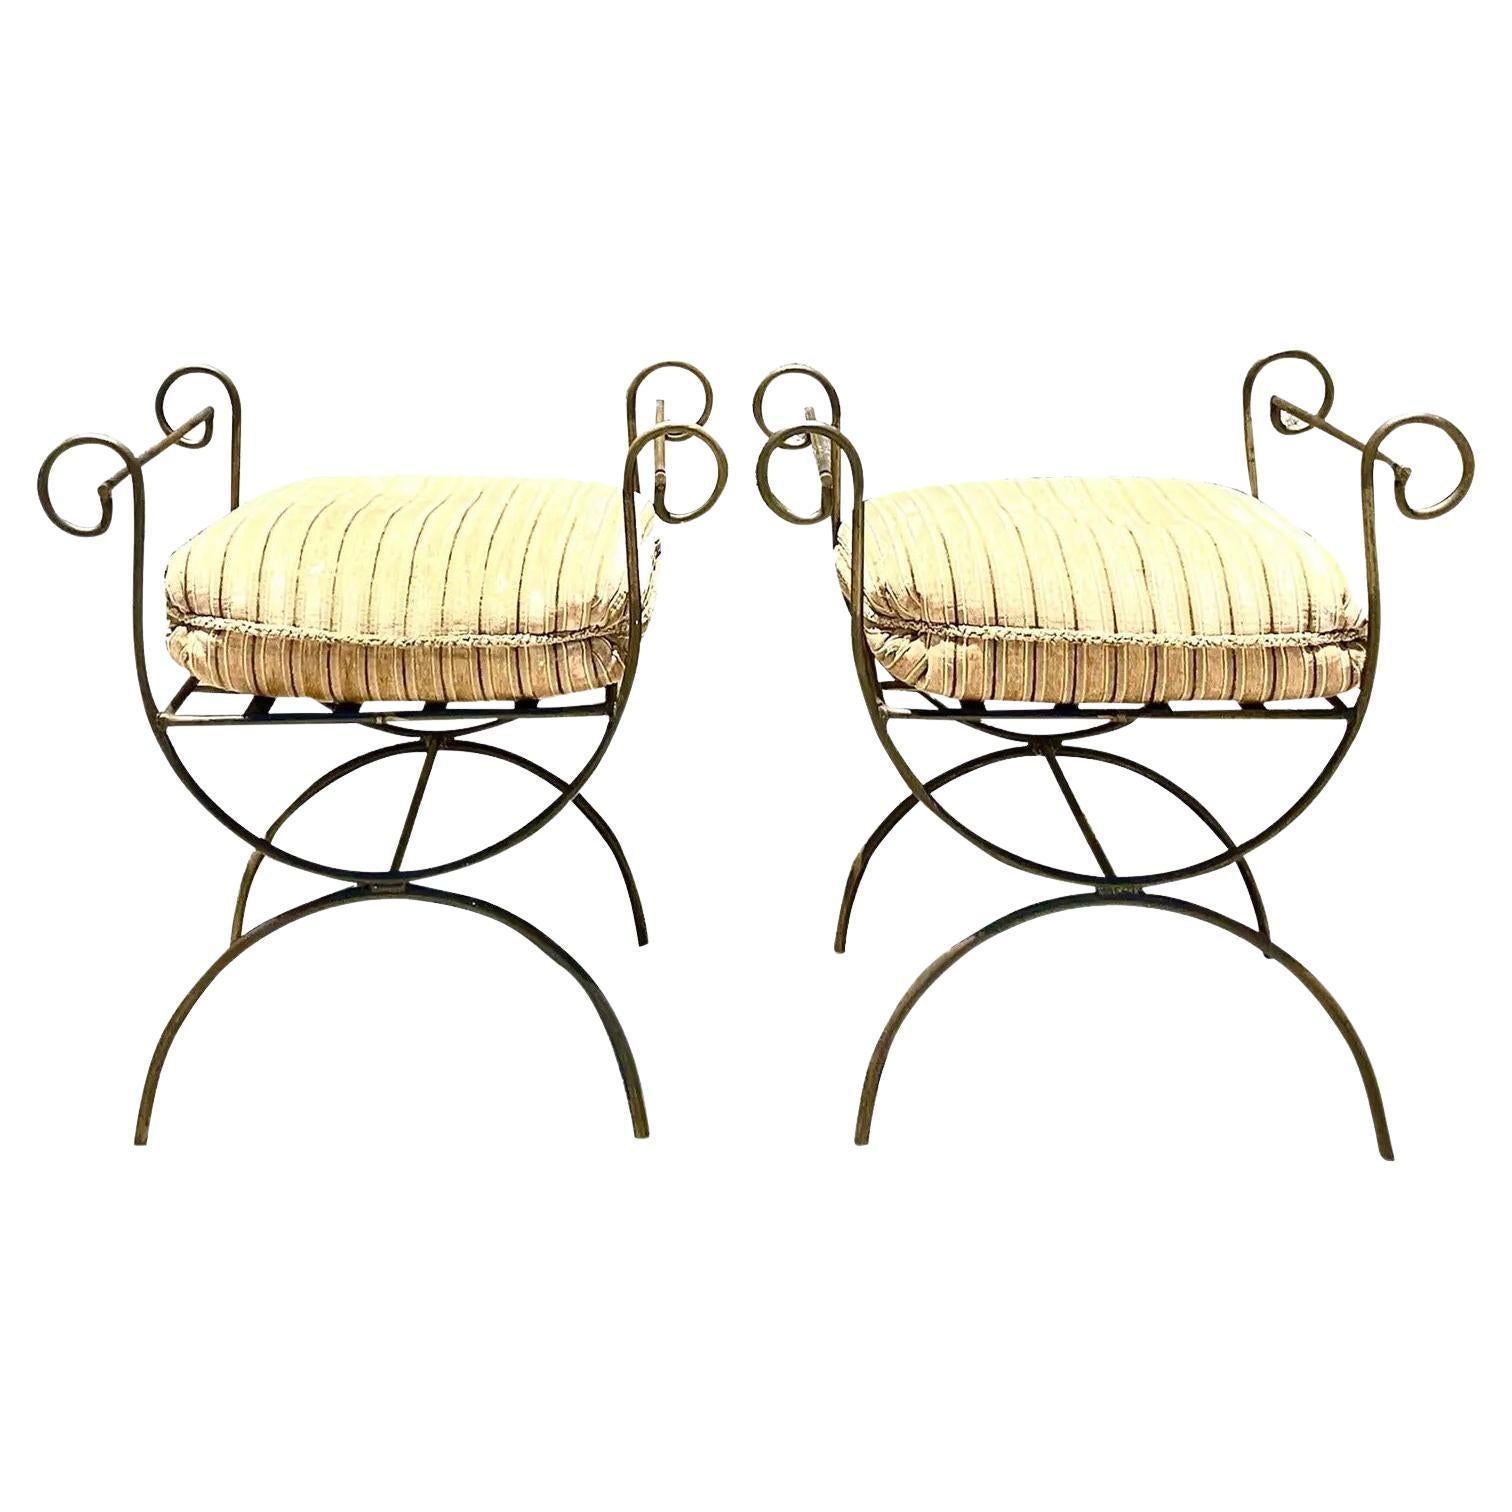 Vintage Regency Curule Wrought Iron Benches, a Pair